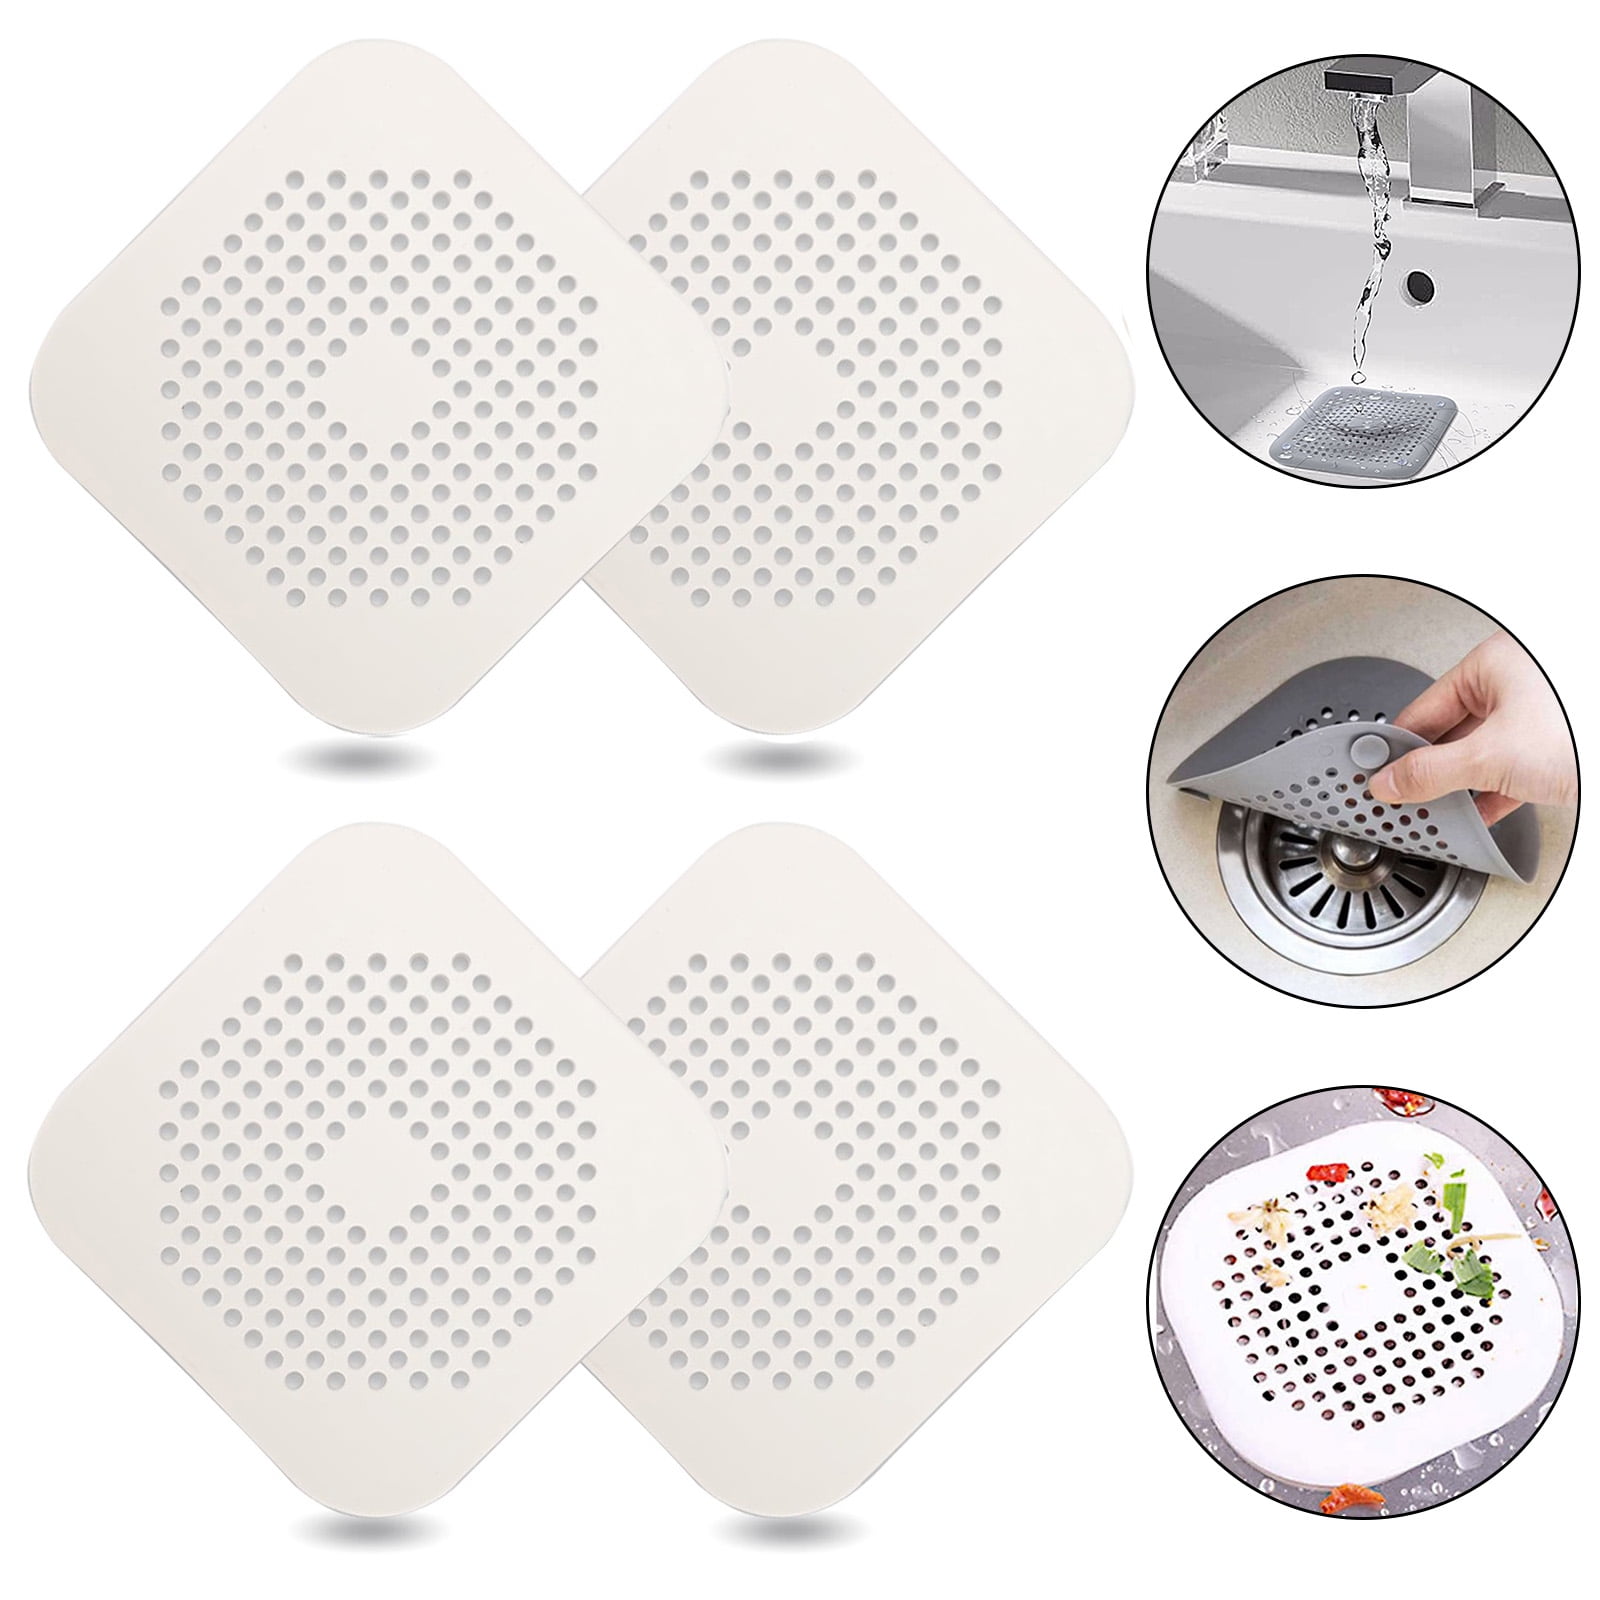 AKUN Bath Shower Sink Waste Hair Strainer Snare Trap Hole Filter Bathroom Silicone Sink Drain Hair Catcher Drain Cover For Home